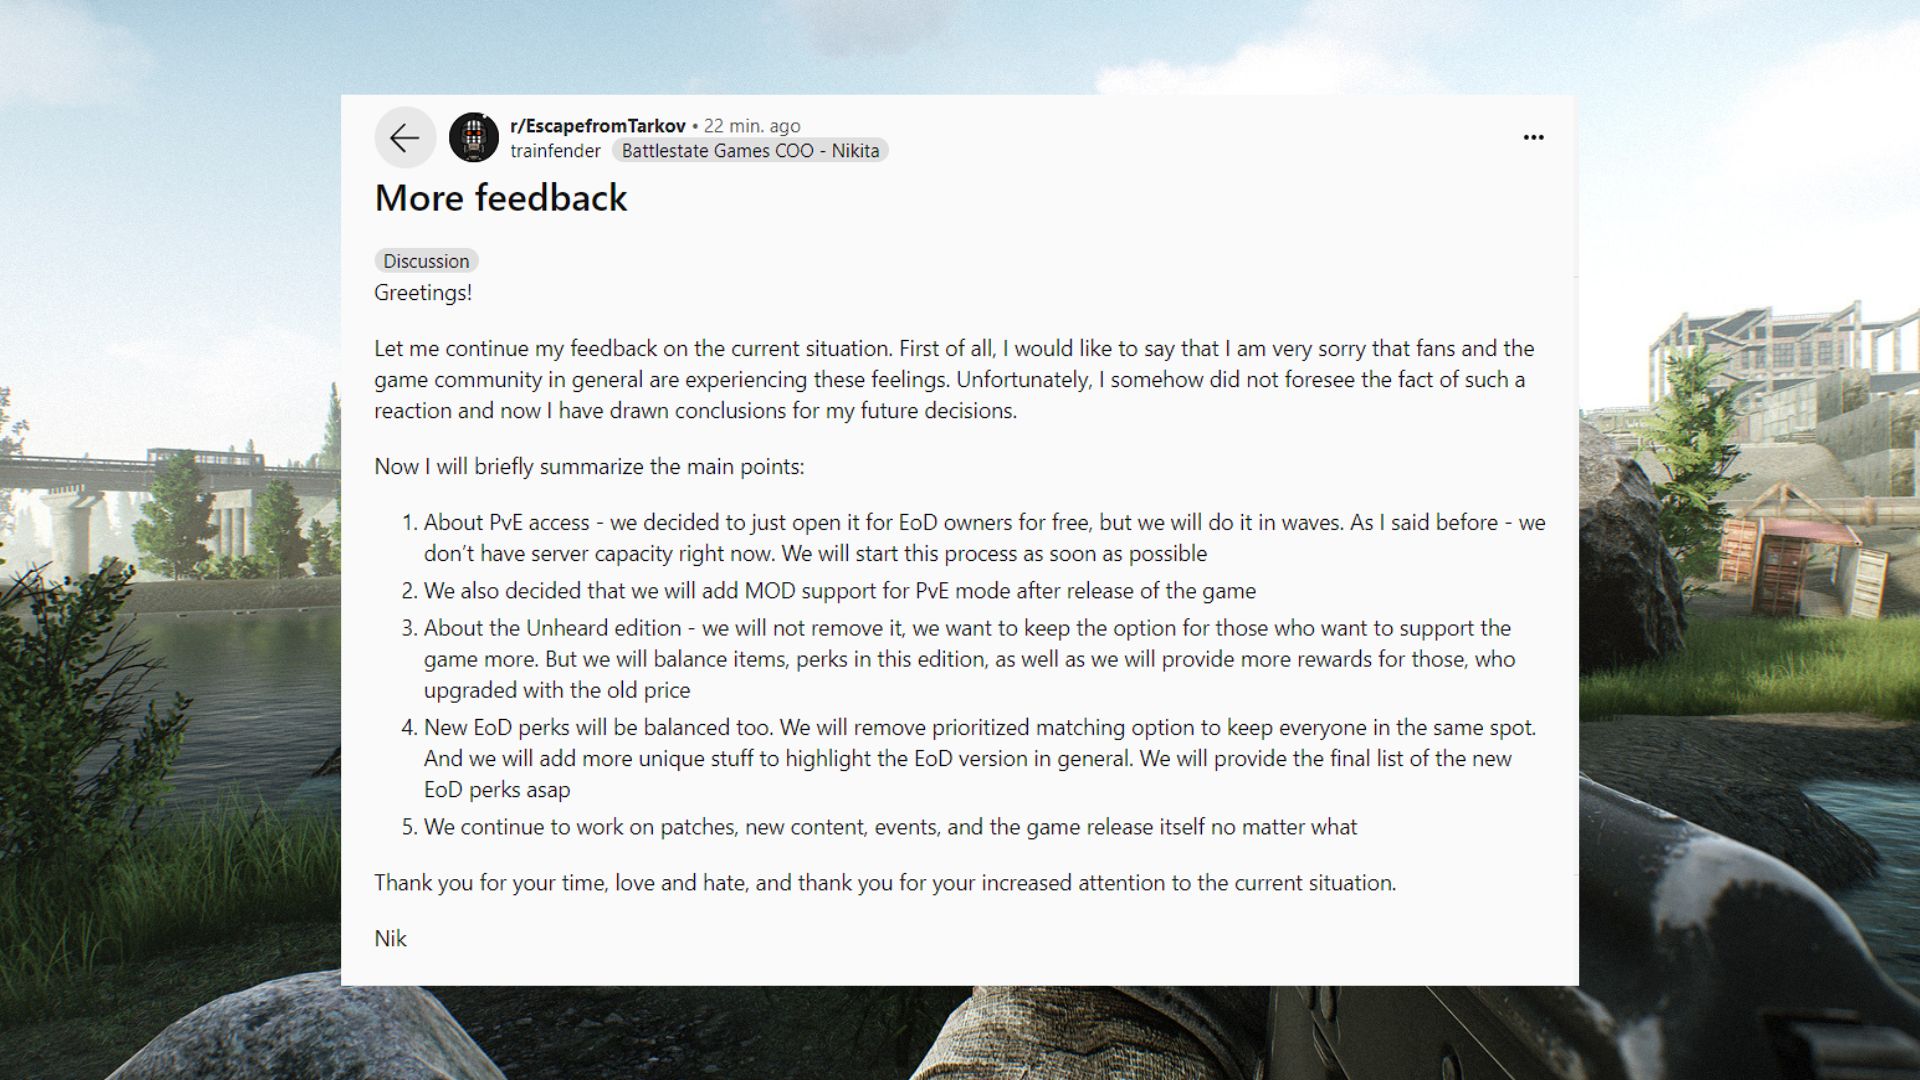 Escape From Tarkov apology: a Reddit post from Battlestate Games' CEO on EFT